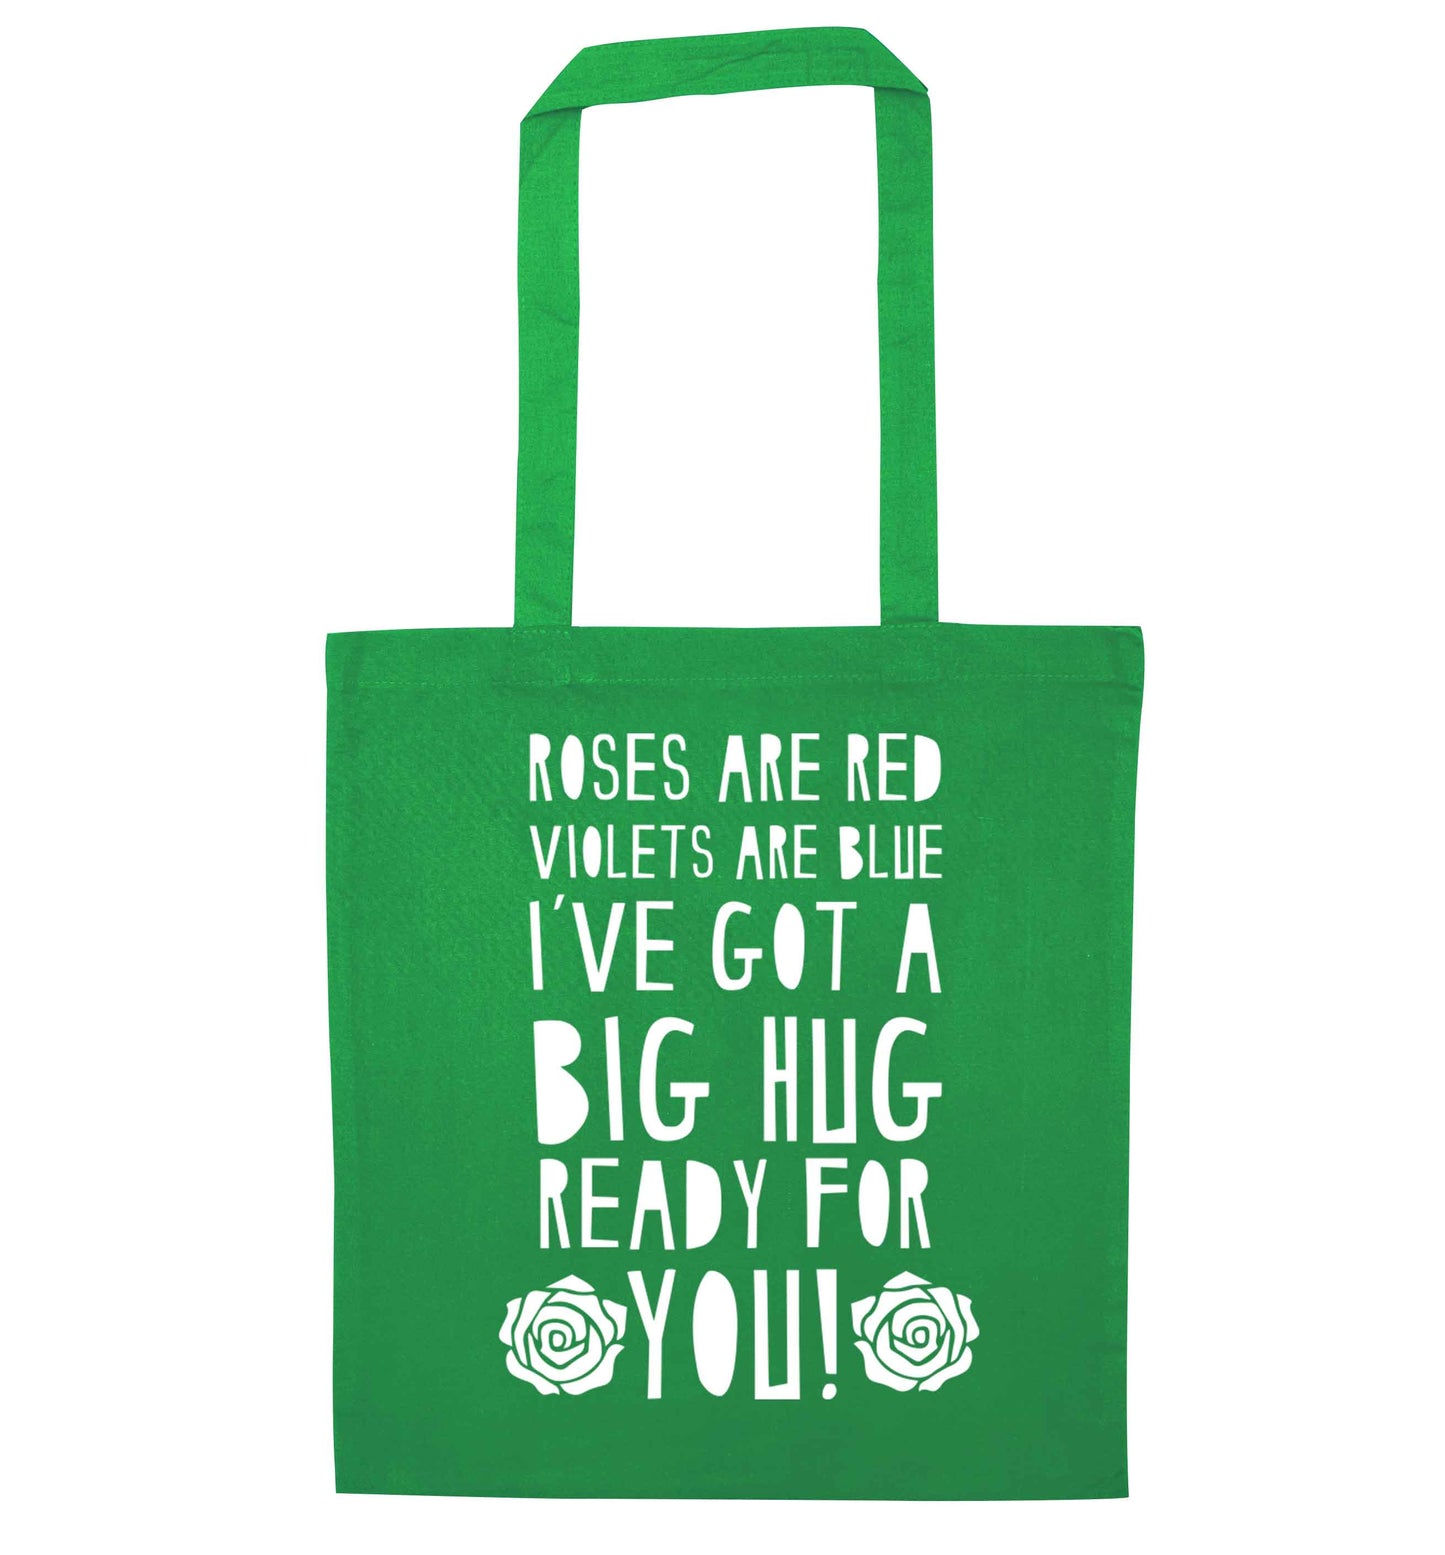 Roses are red violets are blue I've got a big hug coming for you green tote bag